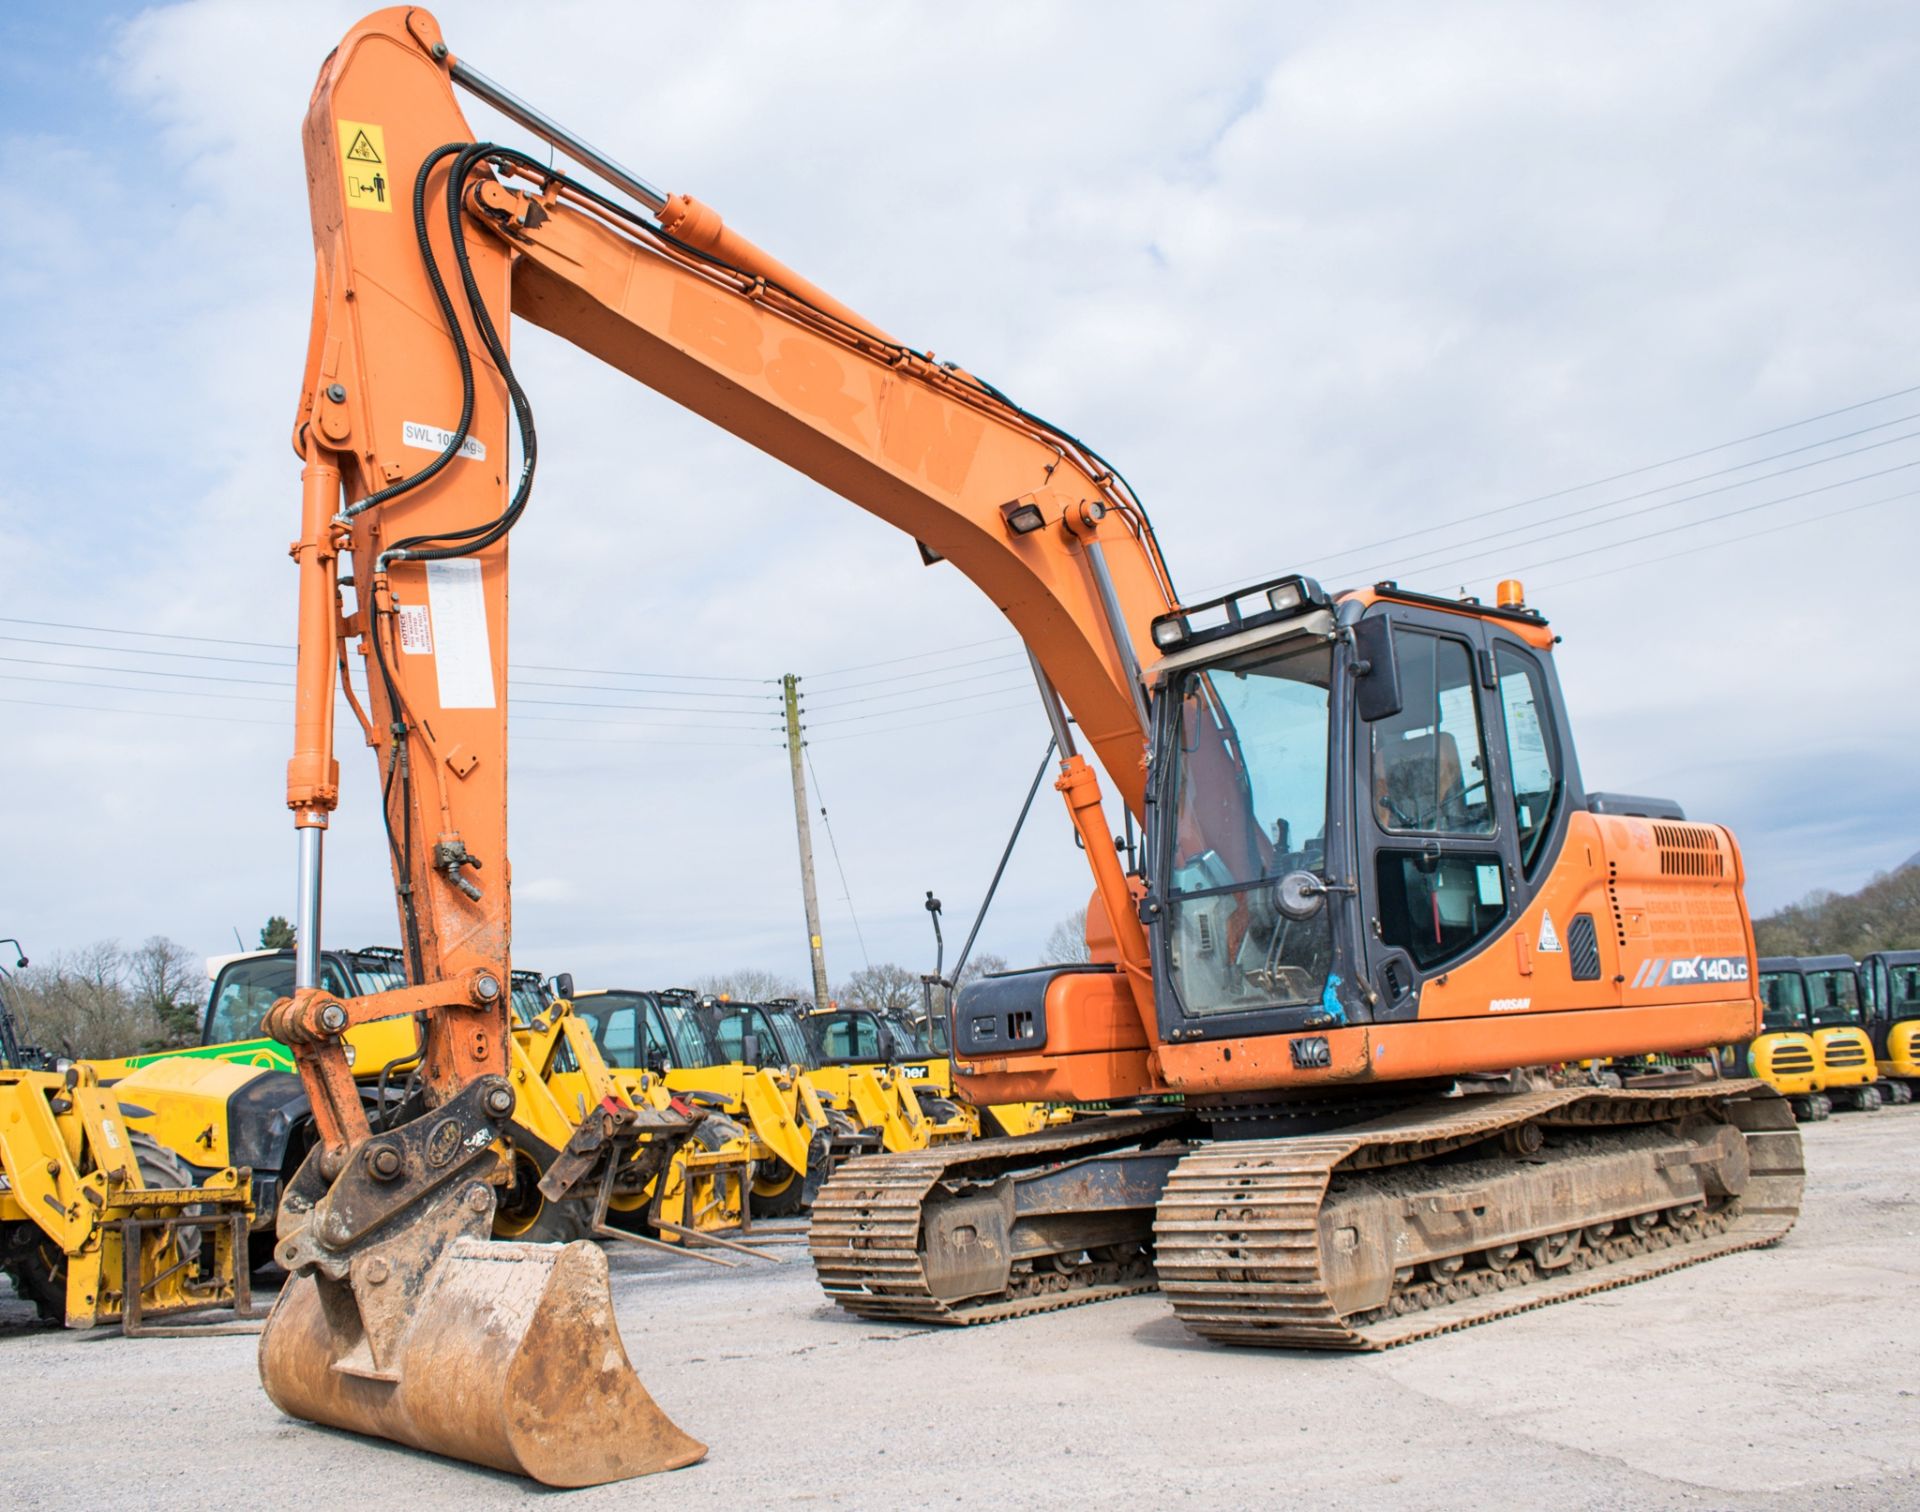 Doosan DX140LC 14 tonne steel tracked excavator Year: 2012 S/N: 50792 Recorded Hours: Not